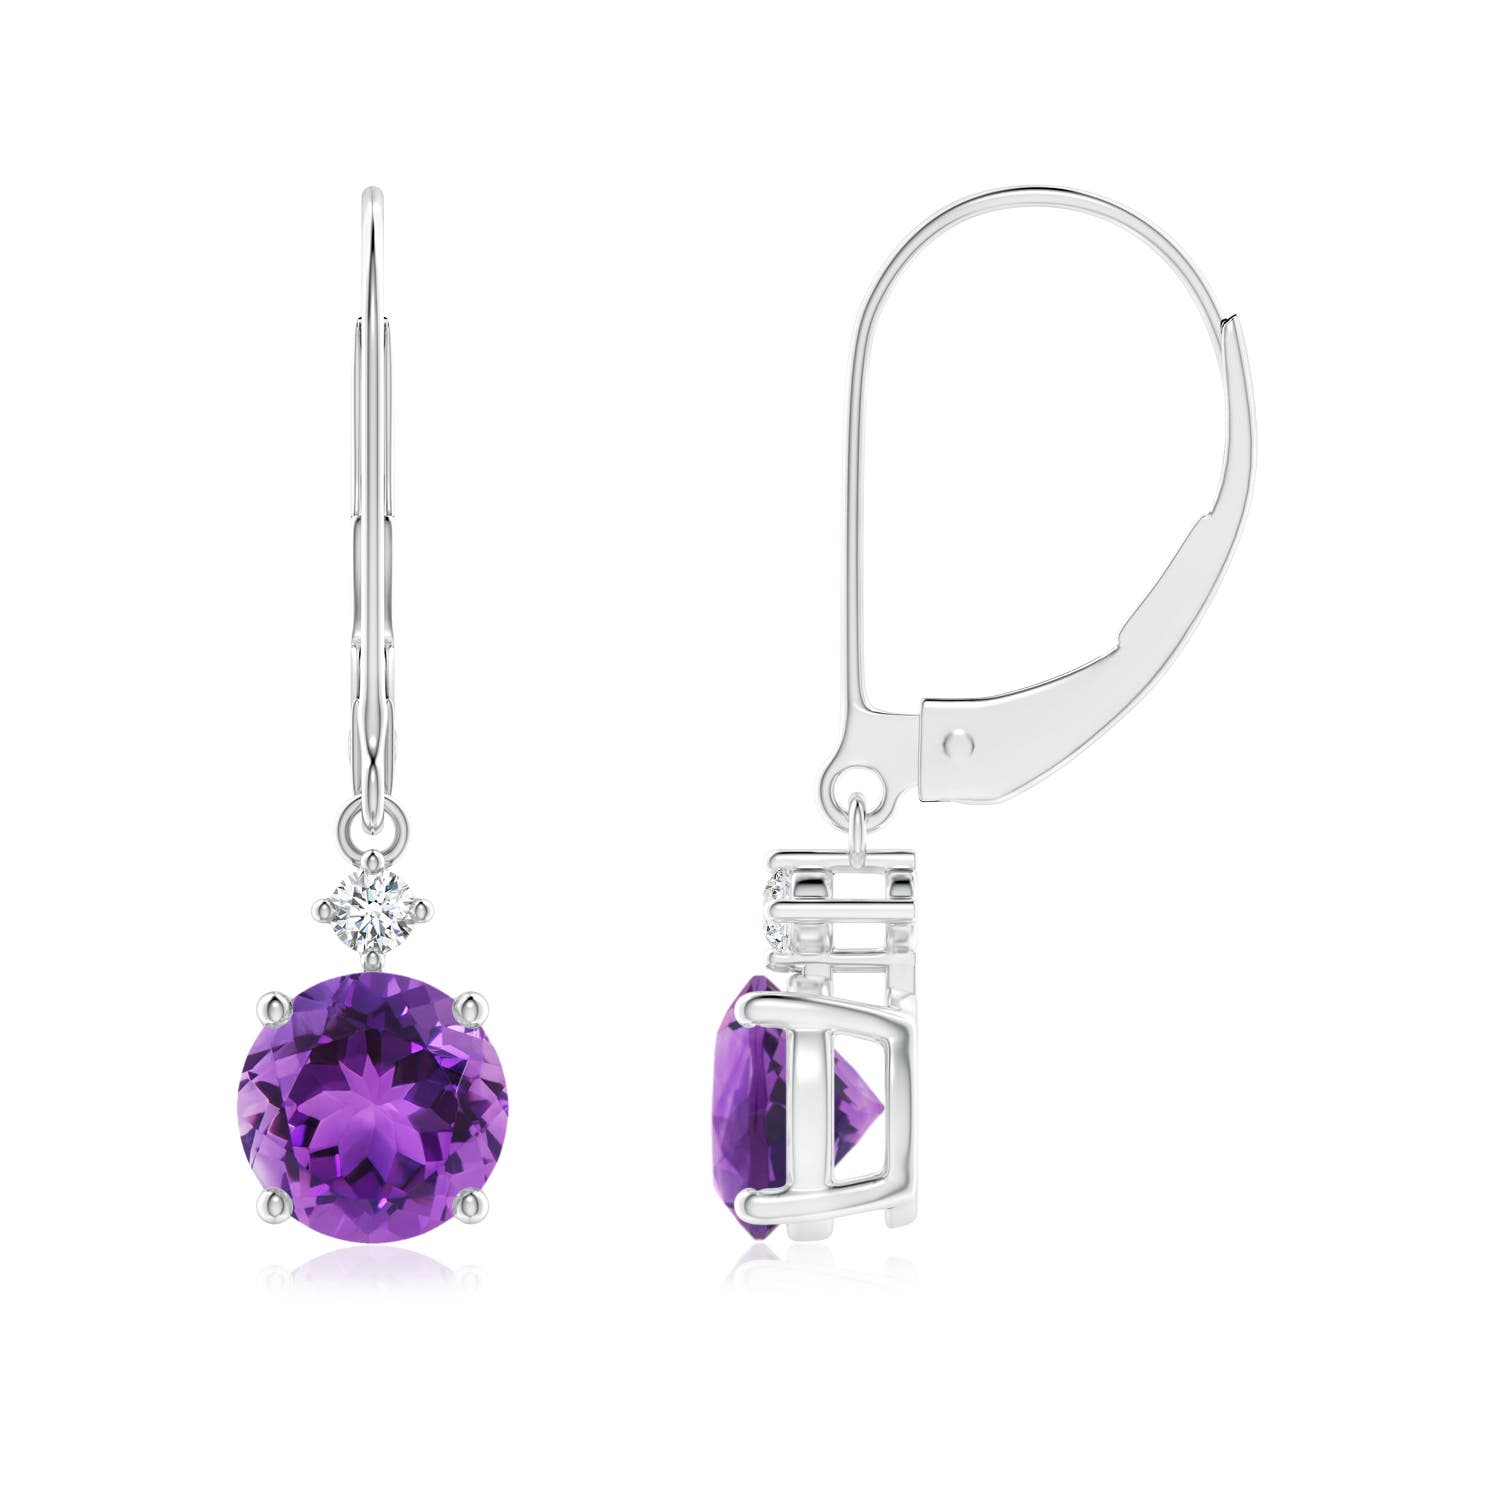 AAA - Amethyst / 1.65 CT / 14 KT White Gold